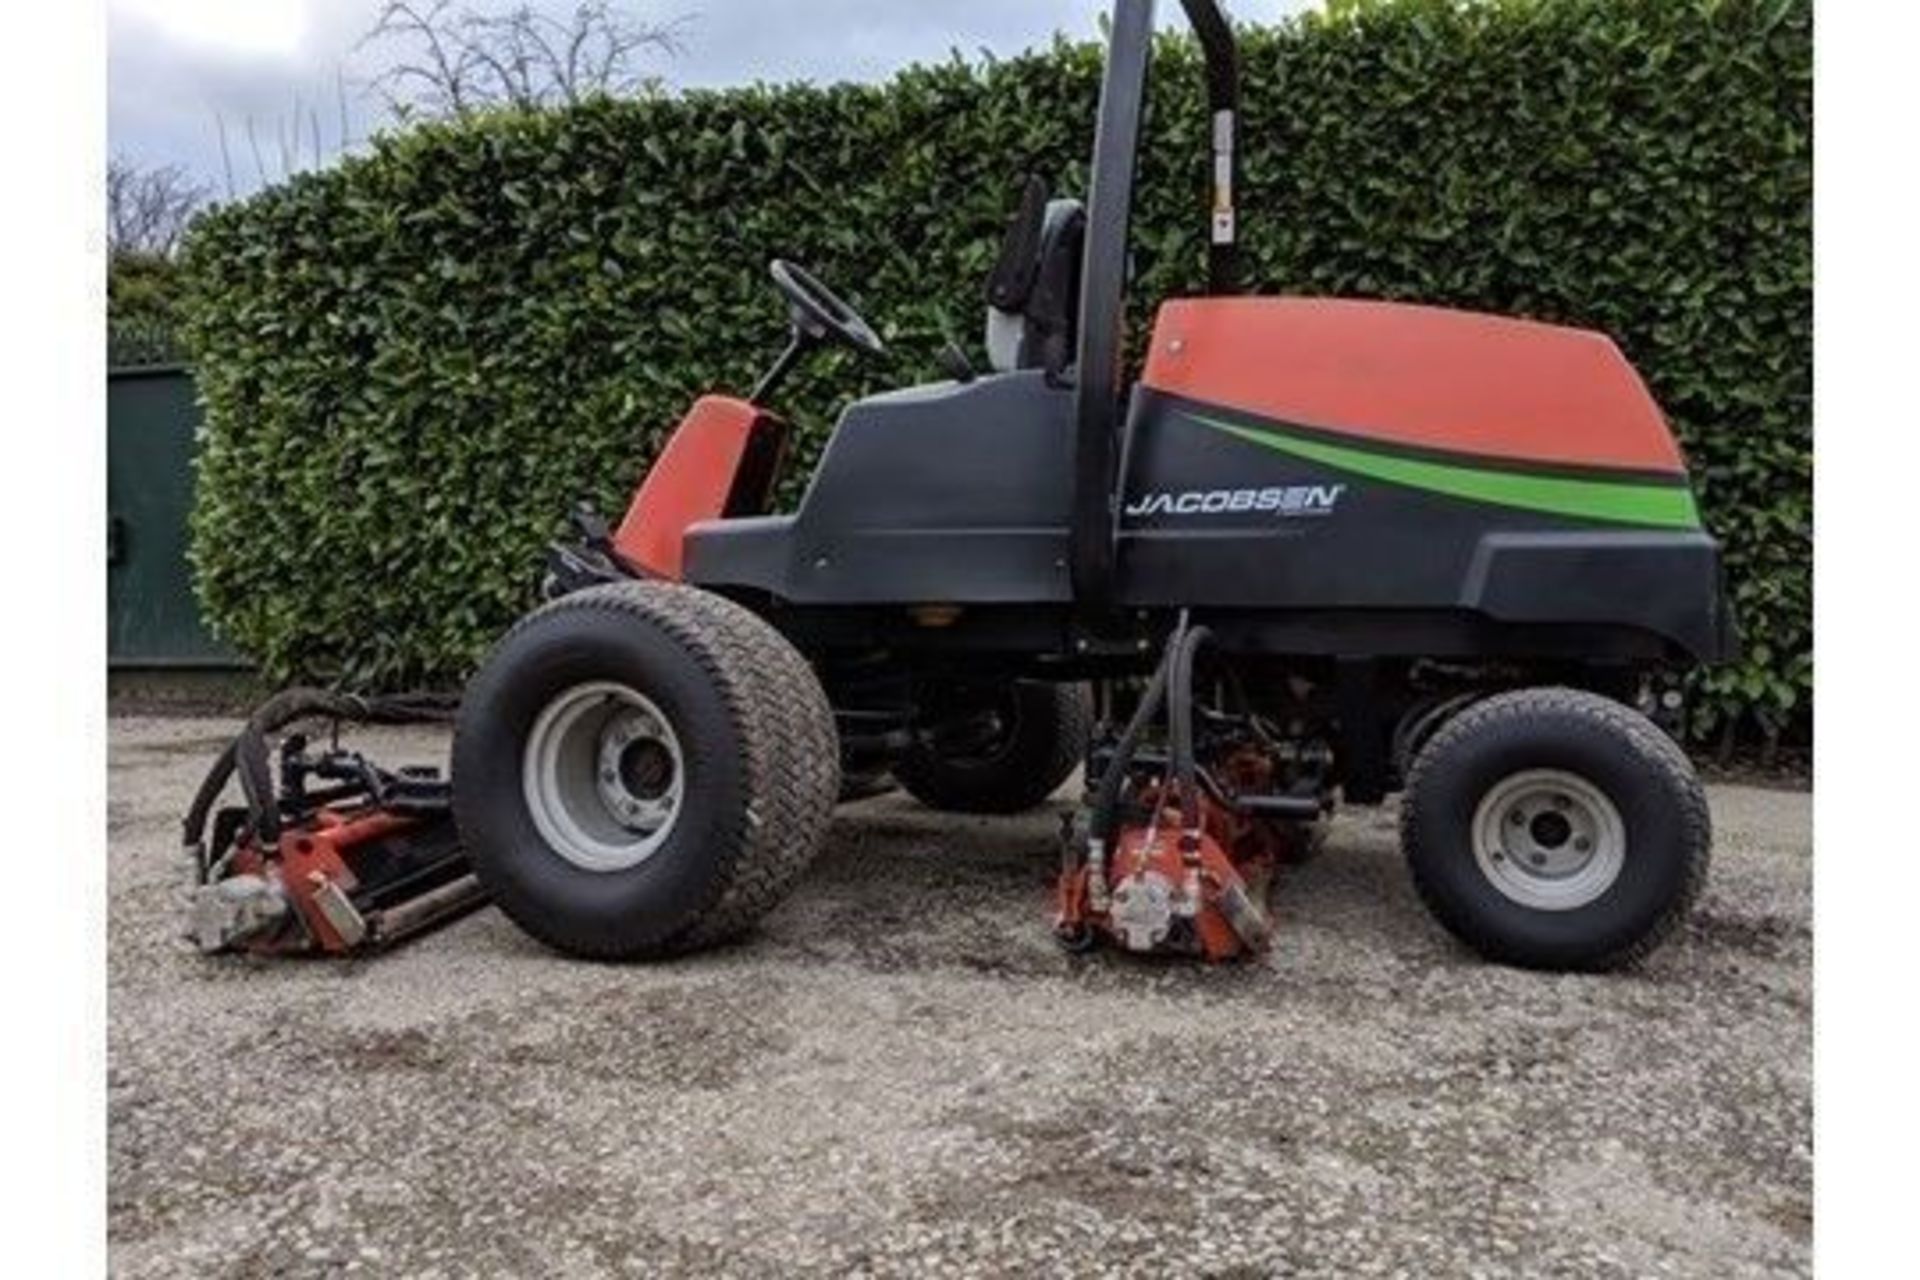 2007 Ransomes Jacobsen LF3800 4WD Cylinder Mower - Image 3 of 8